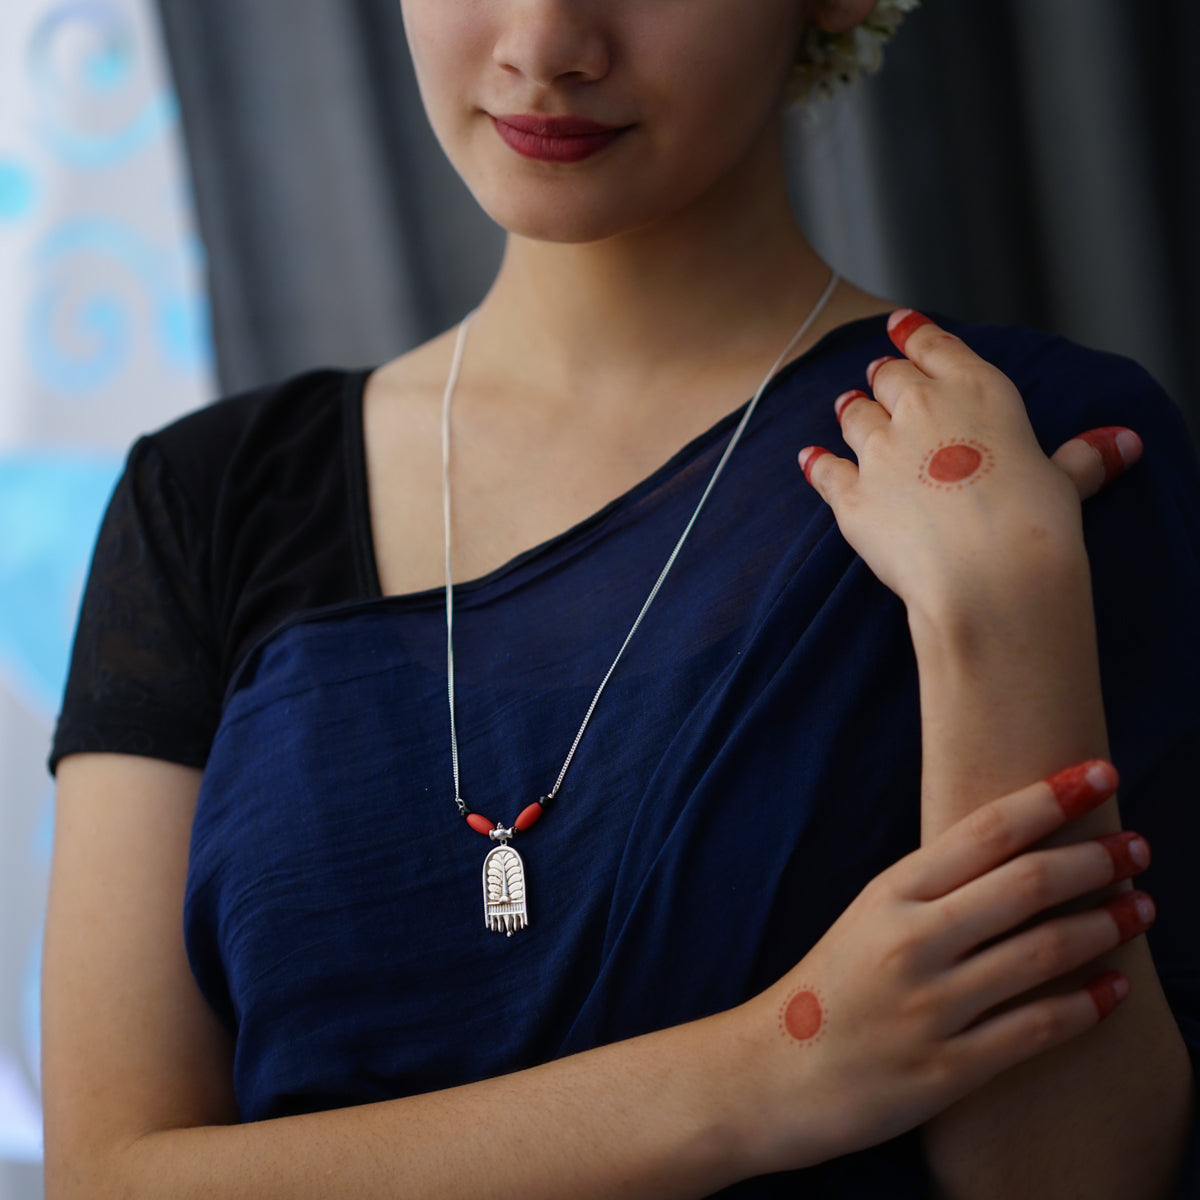 a woman wearing a necklace with a red bead